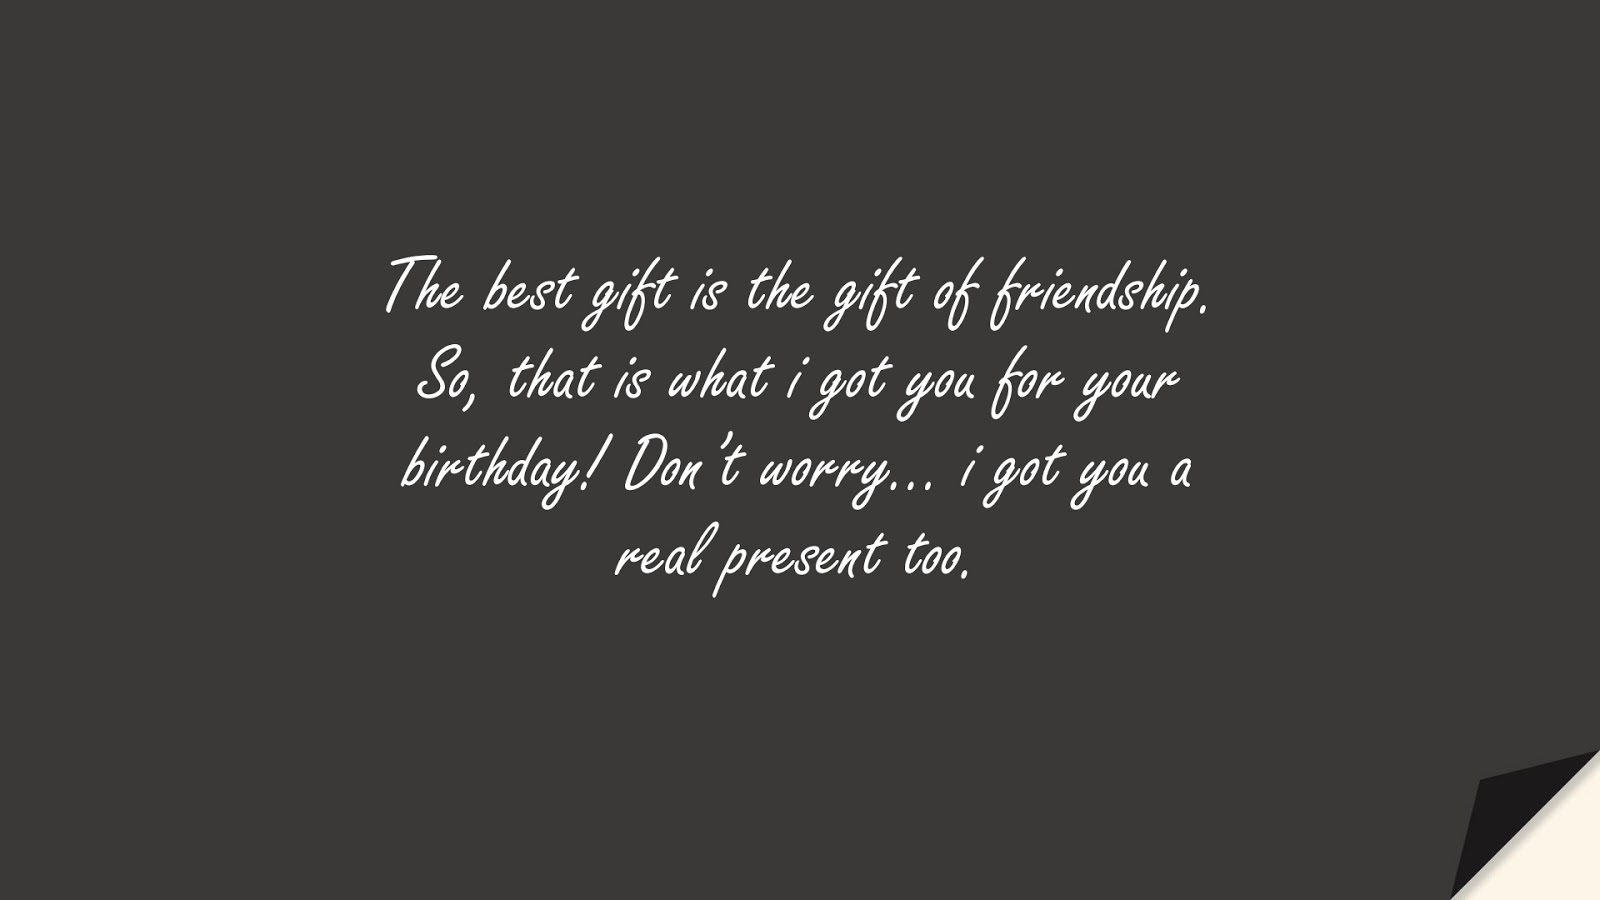 The best gift is the gift of friendship. So, that is what i got you for your birthday! Don’t worry… i got you a real present too.FALSE